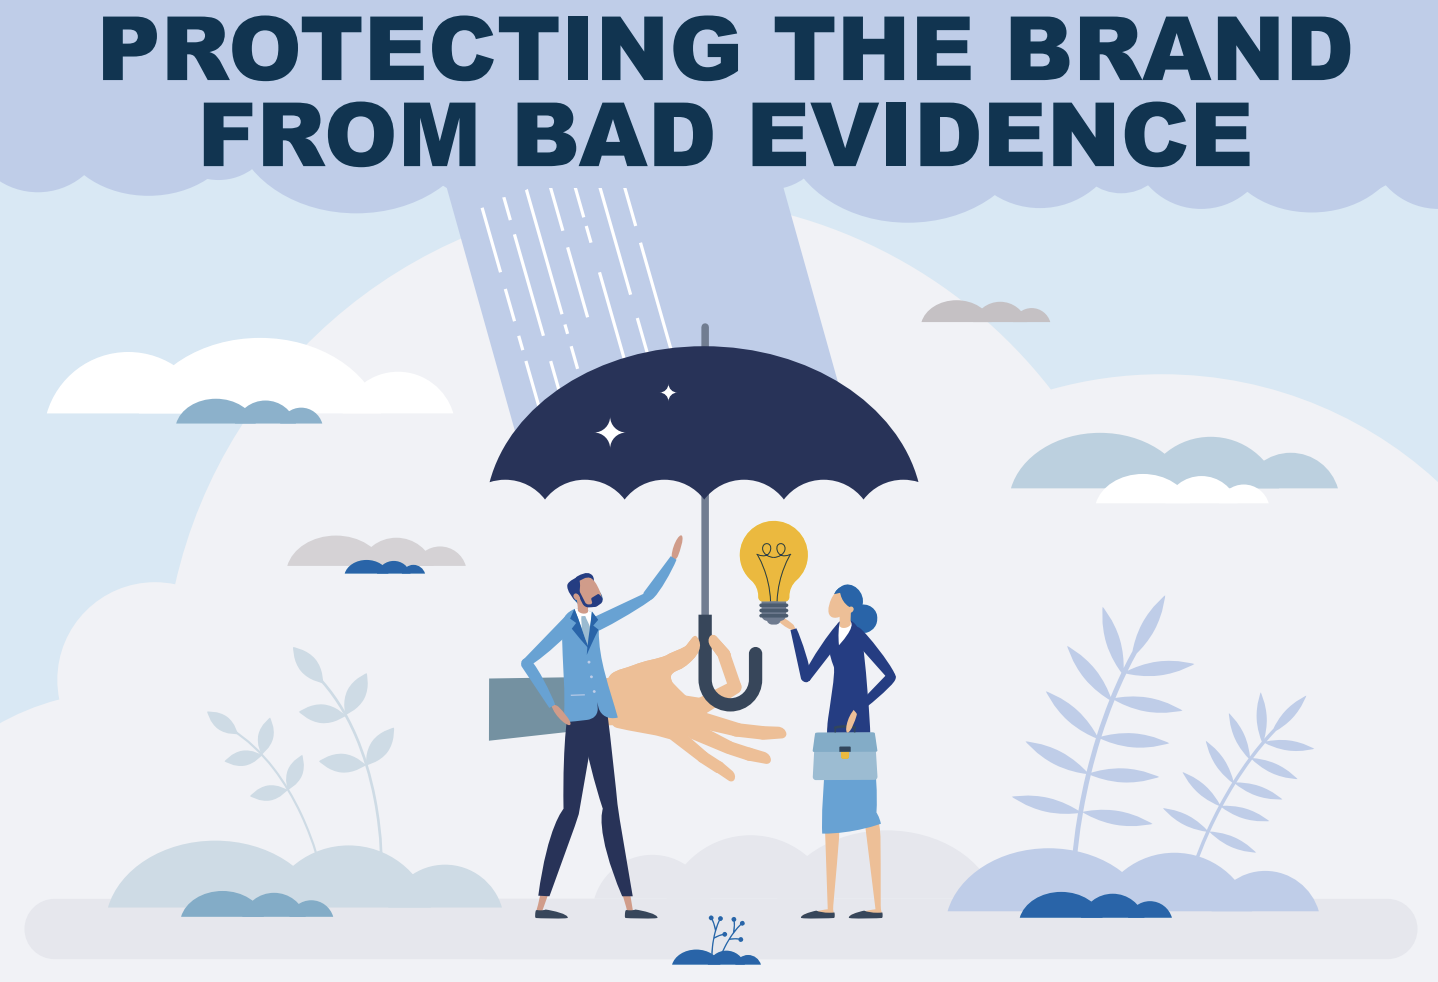 Protecting The Brand from Bad Evidence article